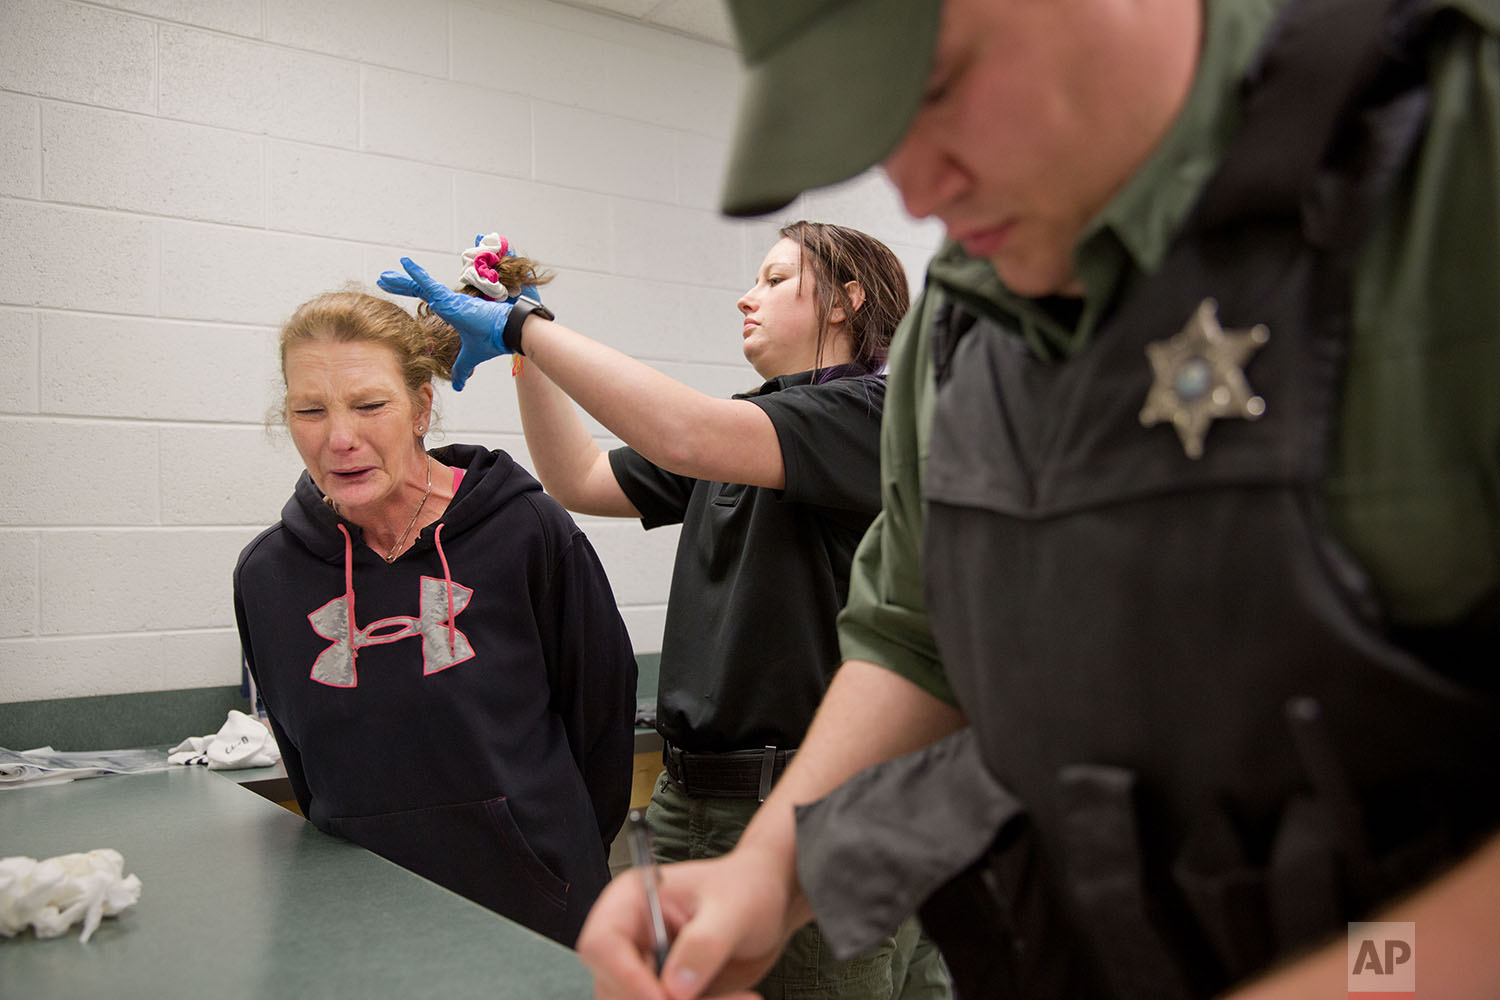  Linda Green, 51, who has struggled with drug addiction, cries as she's booked into the Campbell County Jail after being arrested on charges of public intoxication, a parole violation, in Jacksboro, Tenn., Thursday, March 29, 2018. (AP Photo/David Go